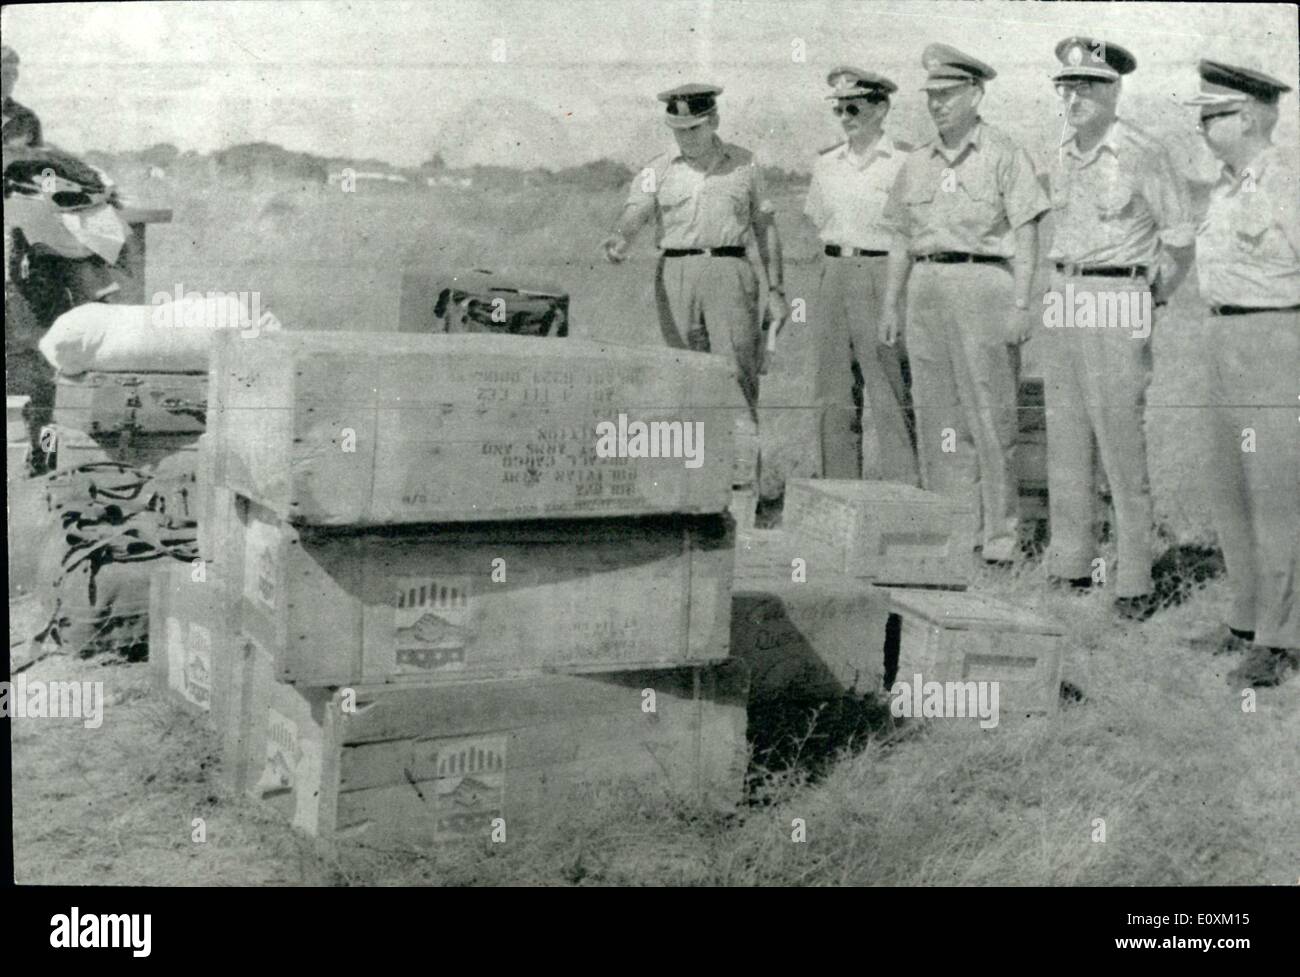 Apr. 04, 1967 - Bolivian army men while receiving a shipment of arms to Fight Guerillas. United States. Stock Photo